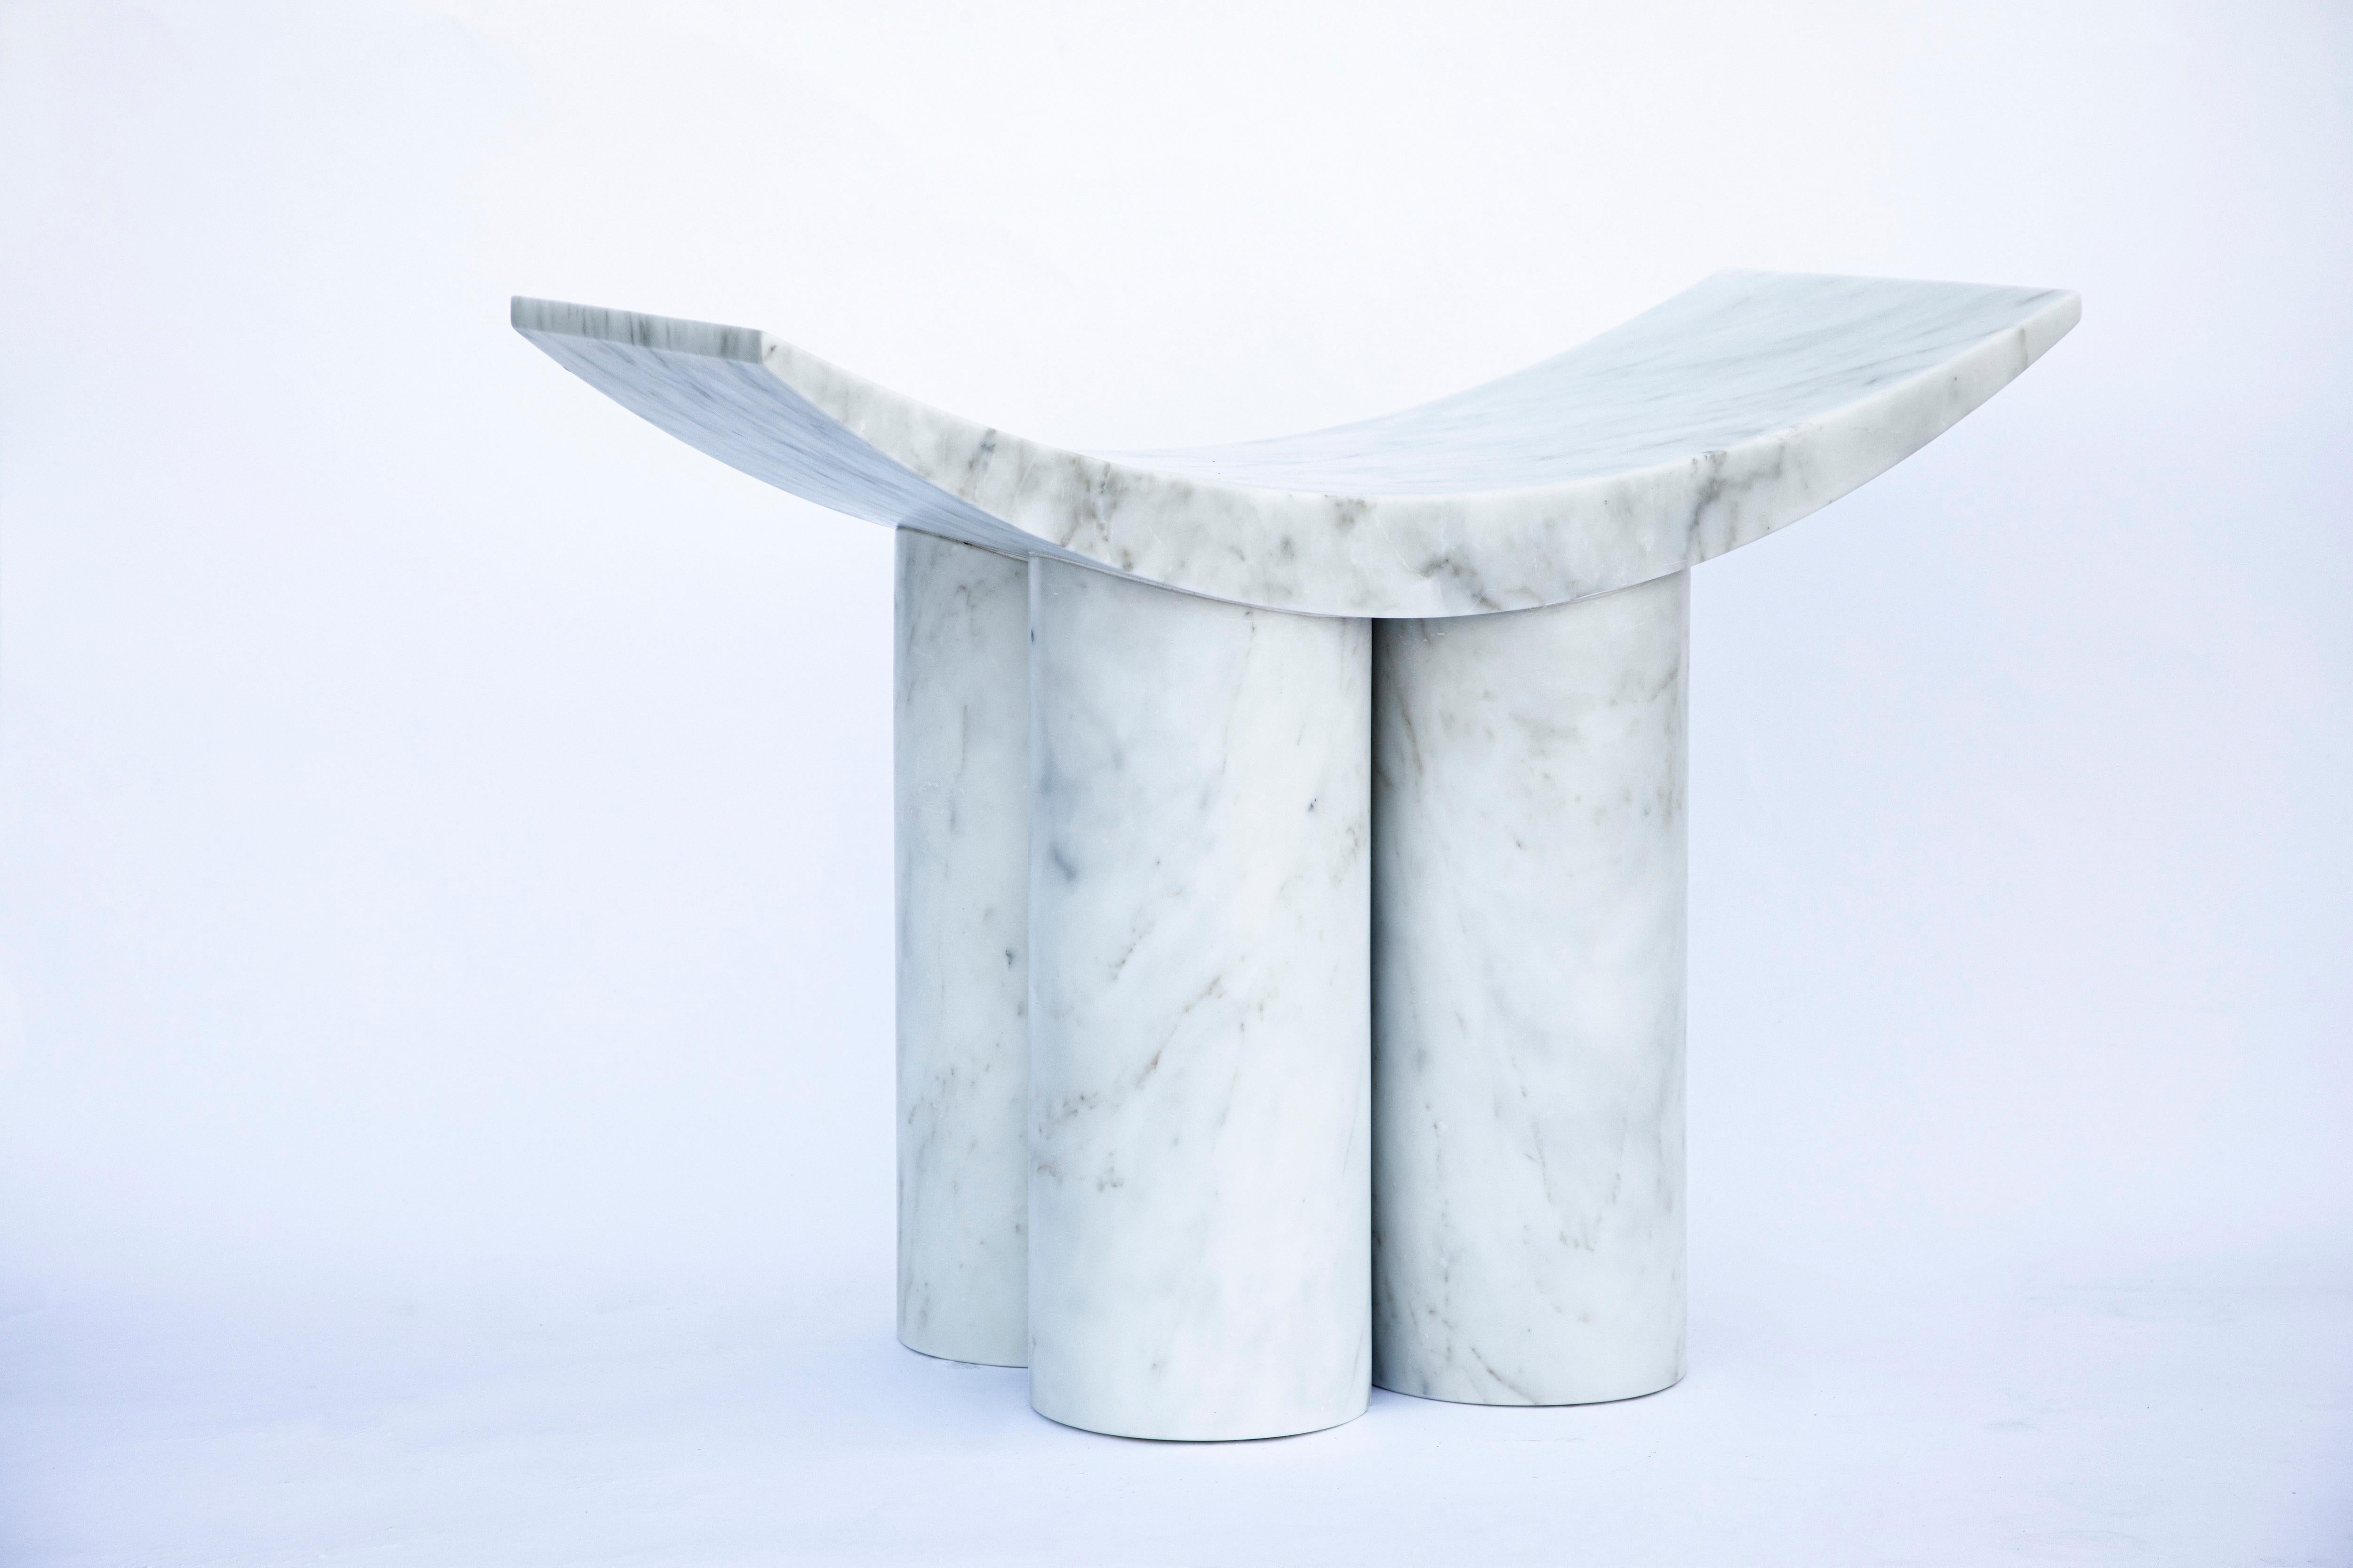 White marble gamma stool by Pietro Franceschini.
Materials: Calacatta delicata marble
Dimensions: W 70cm, L 35cm, H 45cm
Available in other marbles.

Pietro Franceschini
Architect // Designer
Pietro Franceschini is an architect and designer